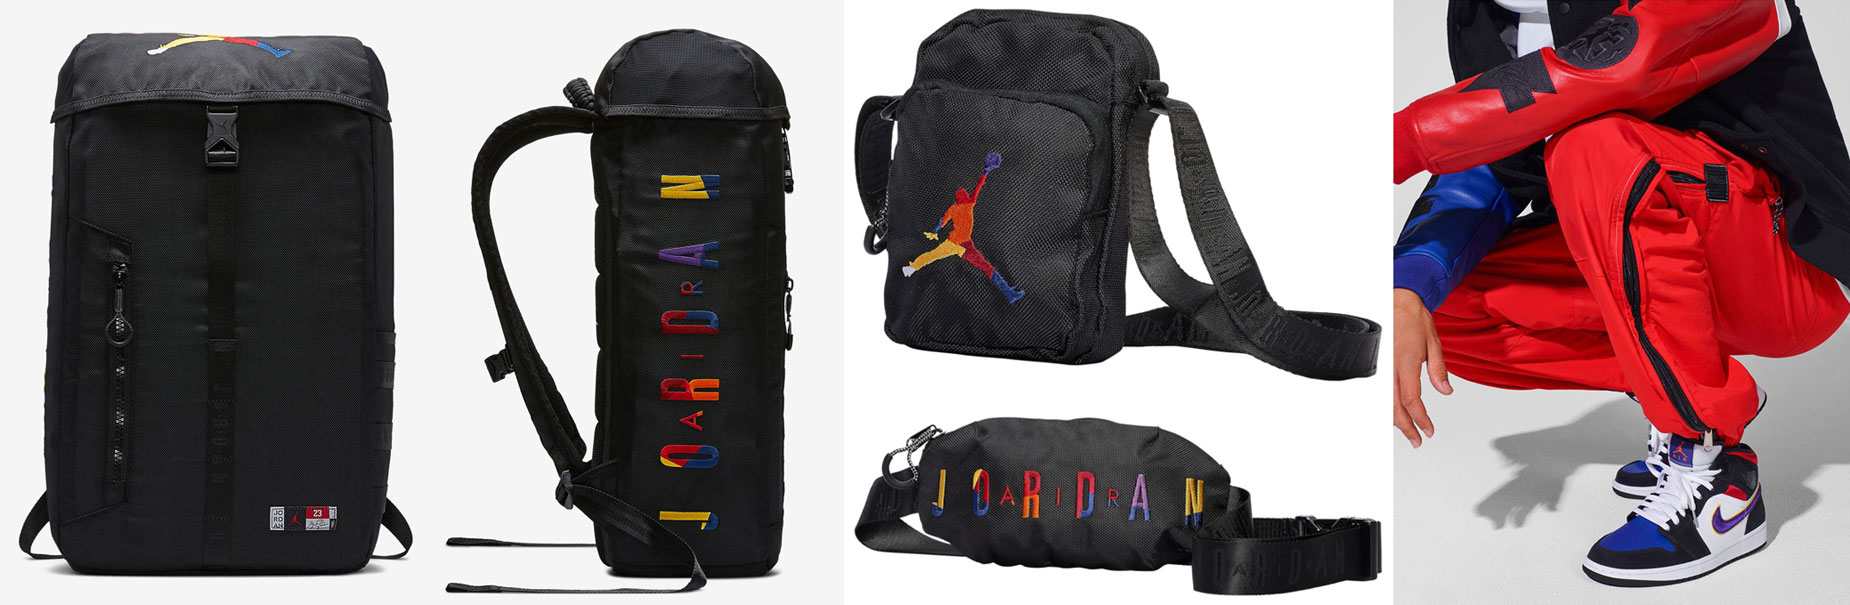 Air Jordan 1 Mid Rivals Backpack and Bags to Match | SneakerFits.com